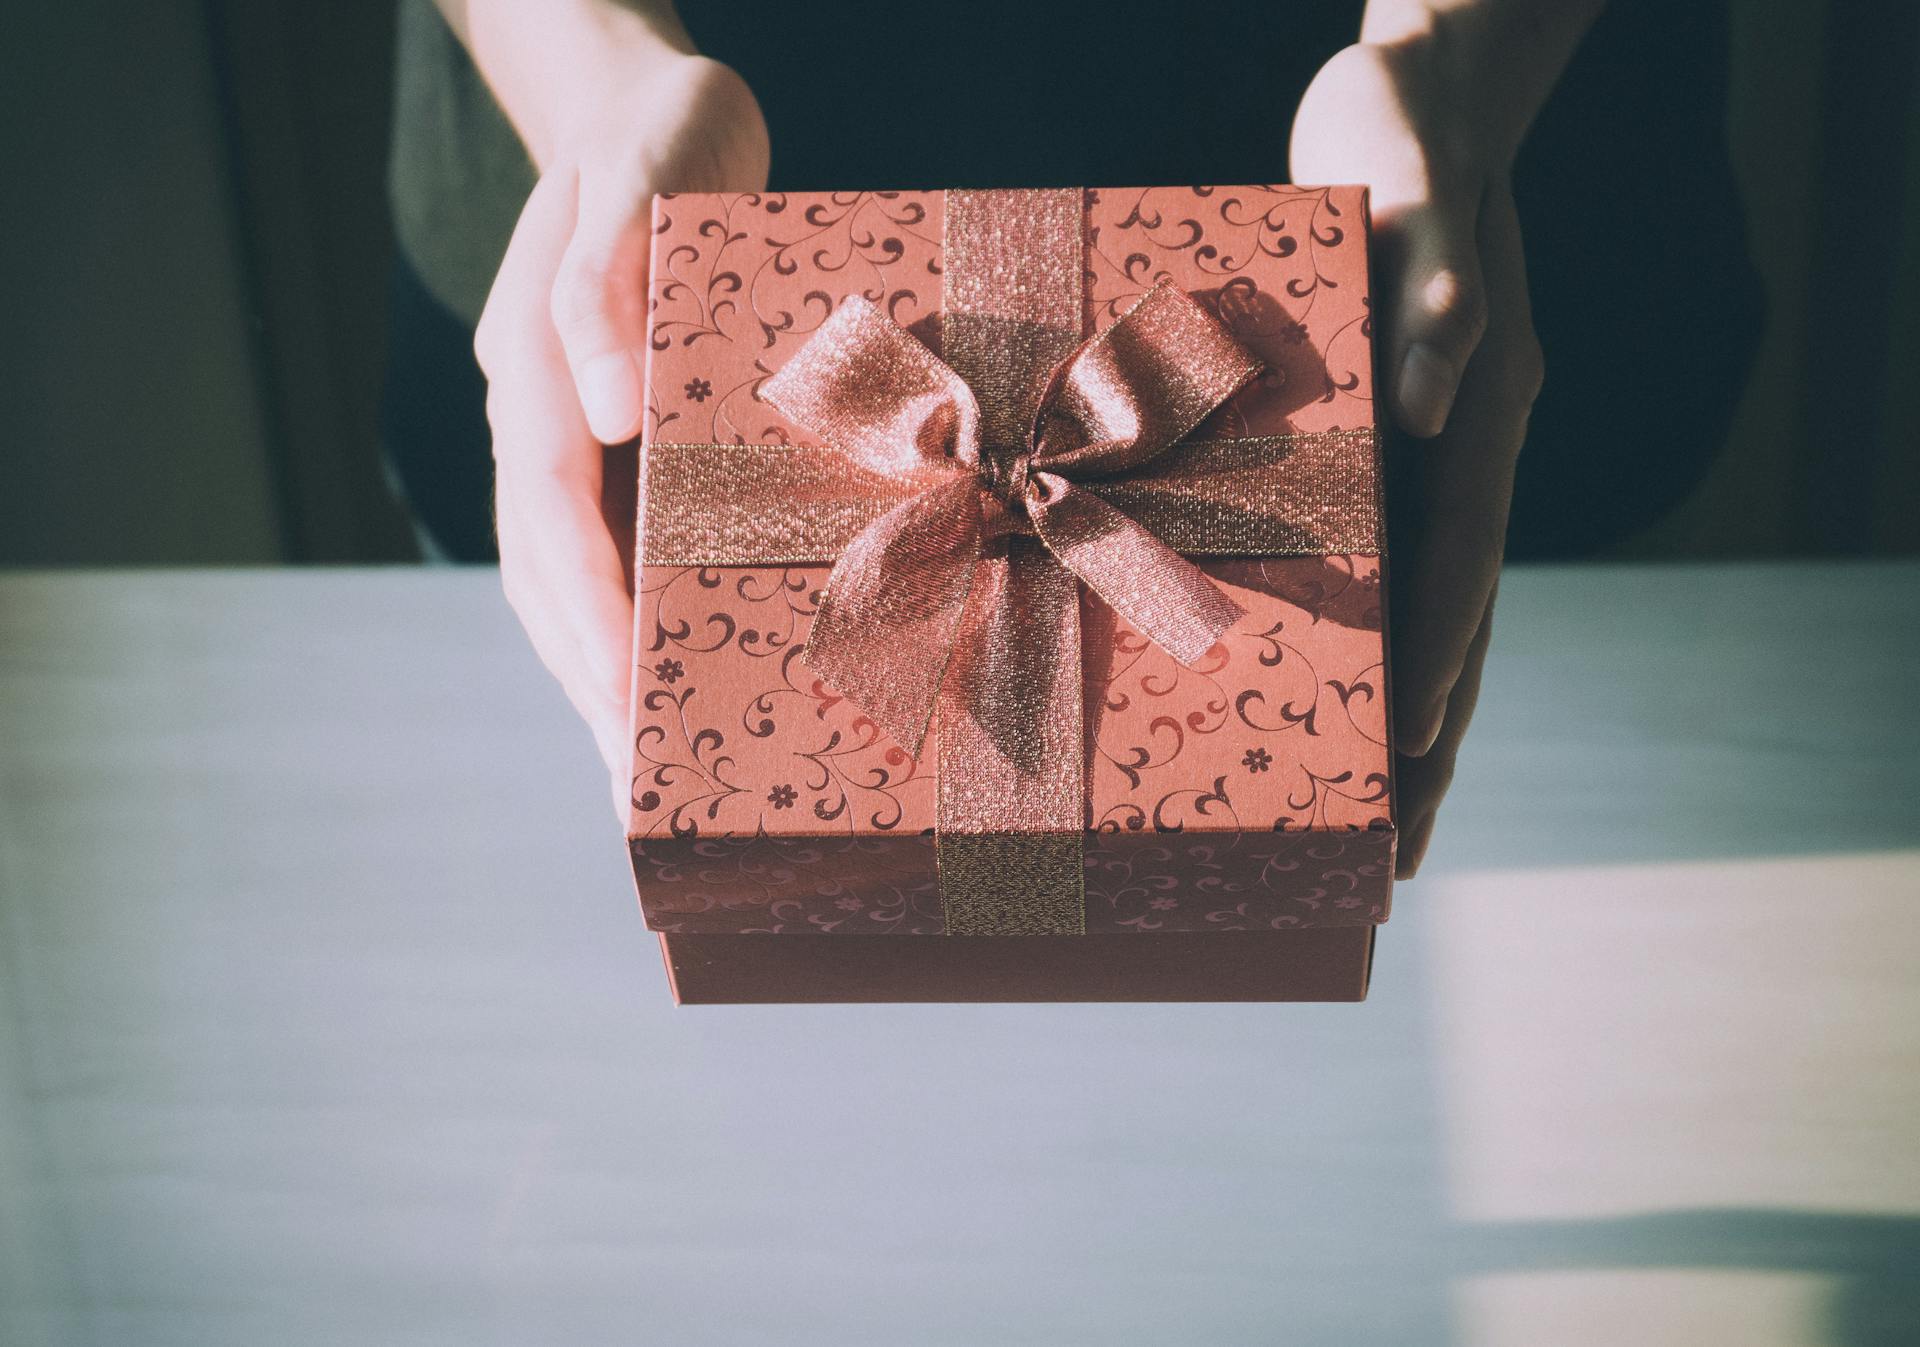 A person holding a gift box | Source: Pexels